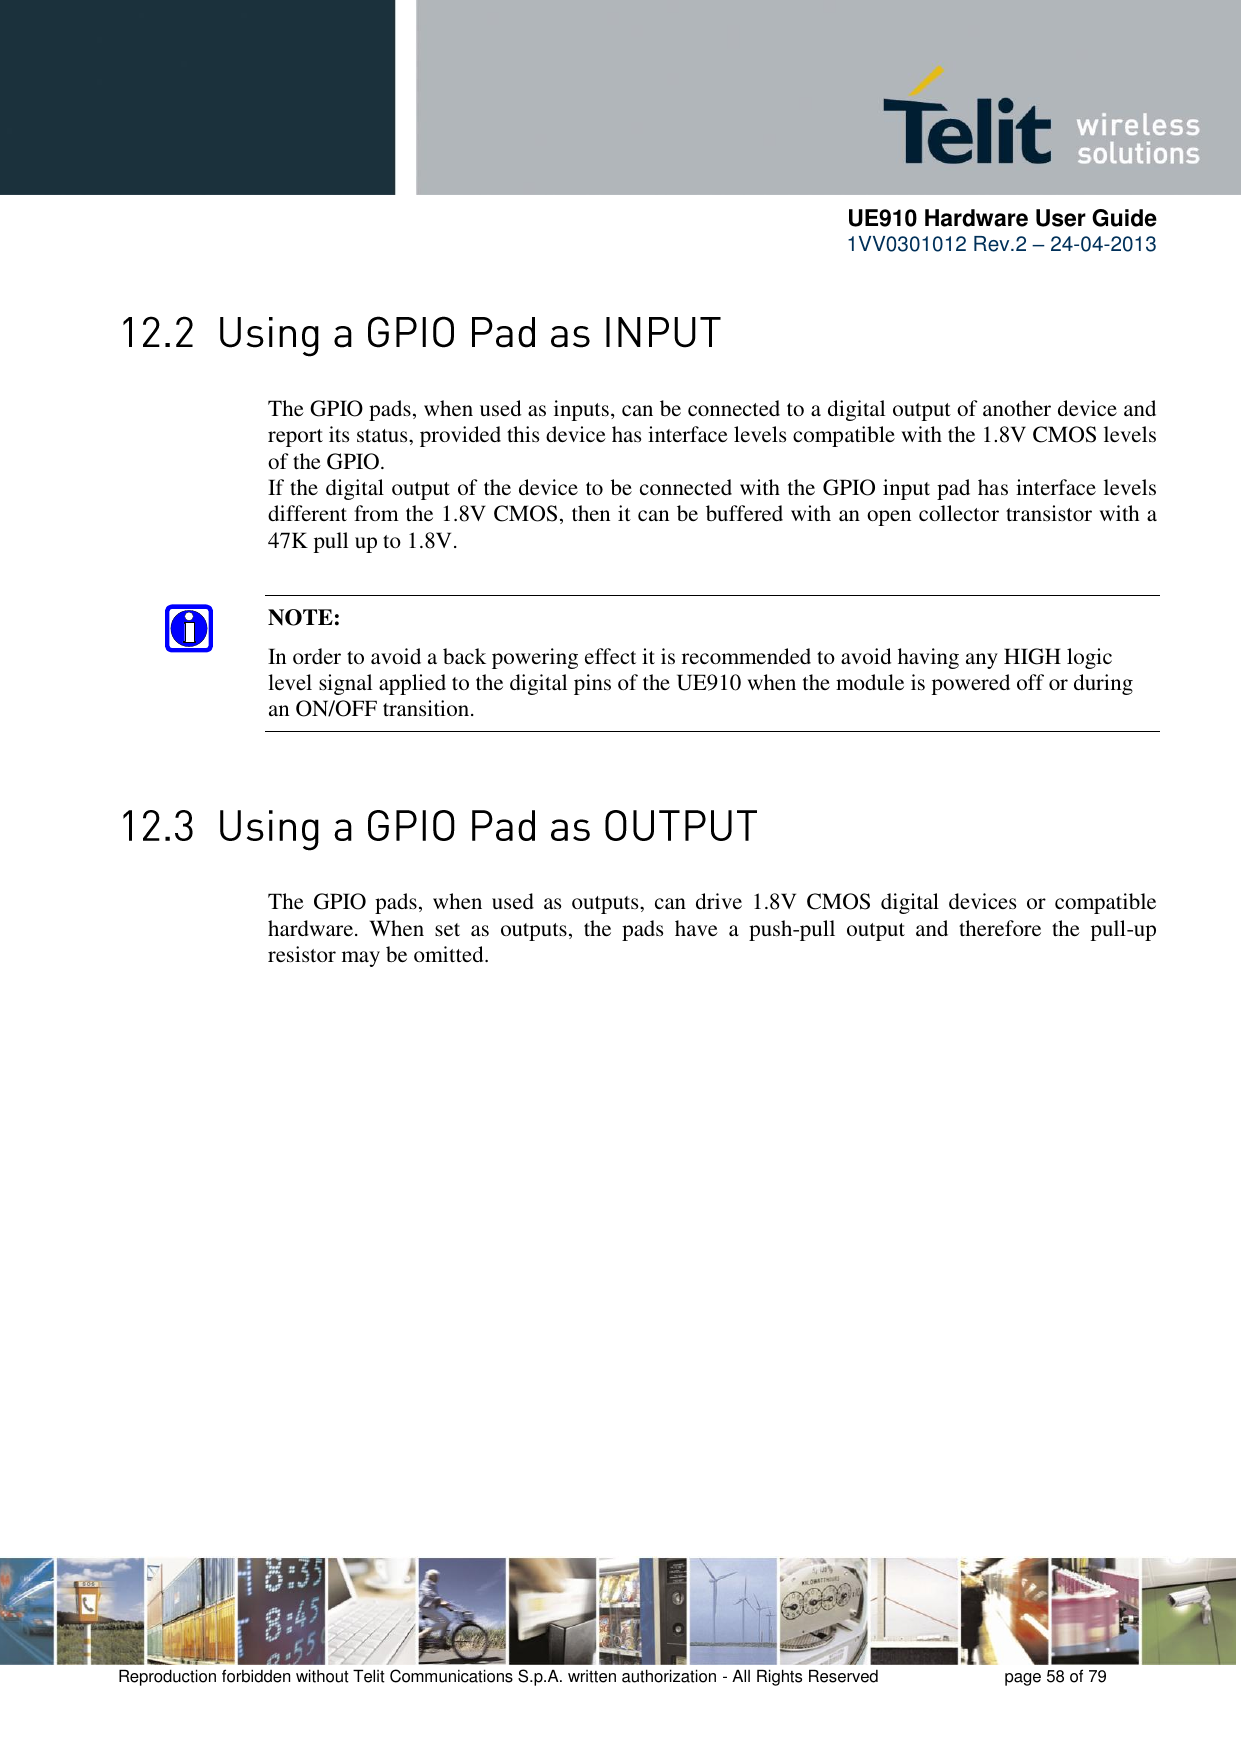      UE910 Hardware User Guide  1VV0301012 Rev.2 – 24-04-2013    Reproduction forbidden without Telit Communications S.p.A. written authorization - All Rights Reserved    page 58 of 79   The GPIO pads, when used as inputs, can be connected to a digital output of another device and report its status, provided this device has interface levels compatible with the 1.8V CMOS levels of the GPIO.  If the digital output of the device to be connected with the GPIO input pad has interface levels different from the 1.8V CMOS, then it can be buffered with an open collector transistor with a 47K pull up to 1.8V. NOTE: In order to avoid a back powering effect it is recommended to avoid having any HIGH logic level signal applied to the digital pins of the UE910 when the module is powered off or during an ON/OFF transition.  The  GPIO pads,  when  used as outputs,  can drive  1.8V  CMOS digital  devices or  compatible hardware.  When  set  as  outputs,  the  pads  have  a  push-pull  output  and  therefore  the  pull-up resistor may be omitted. 